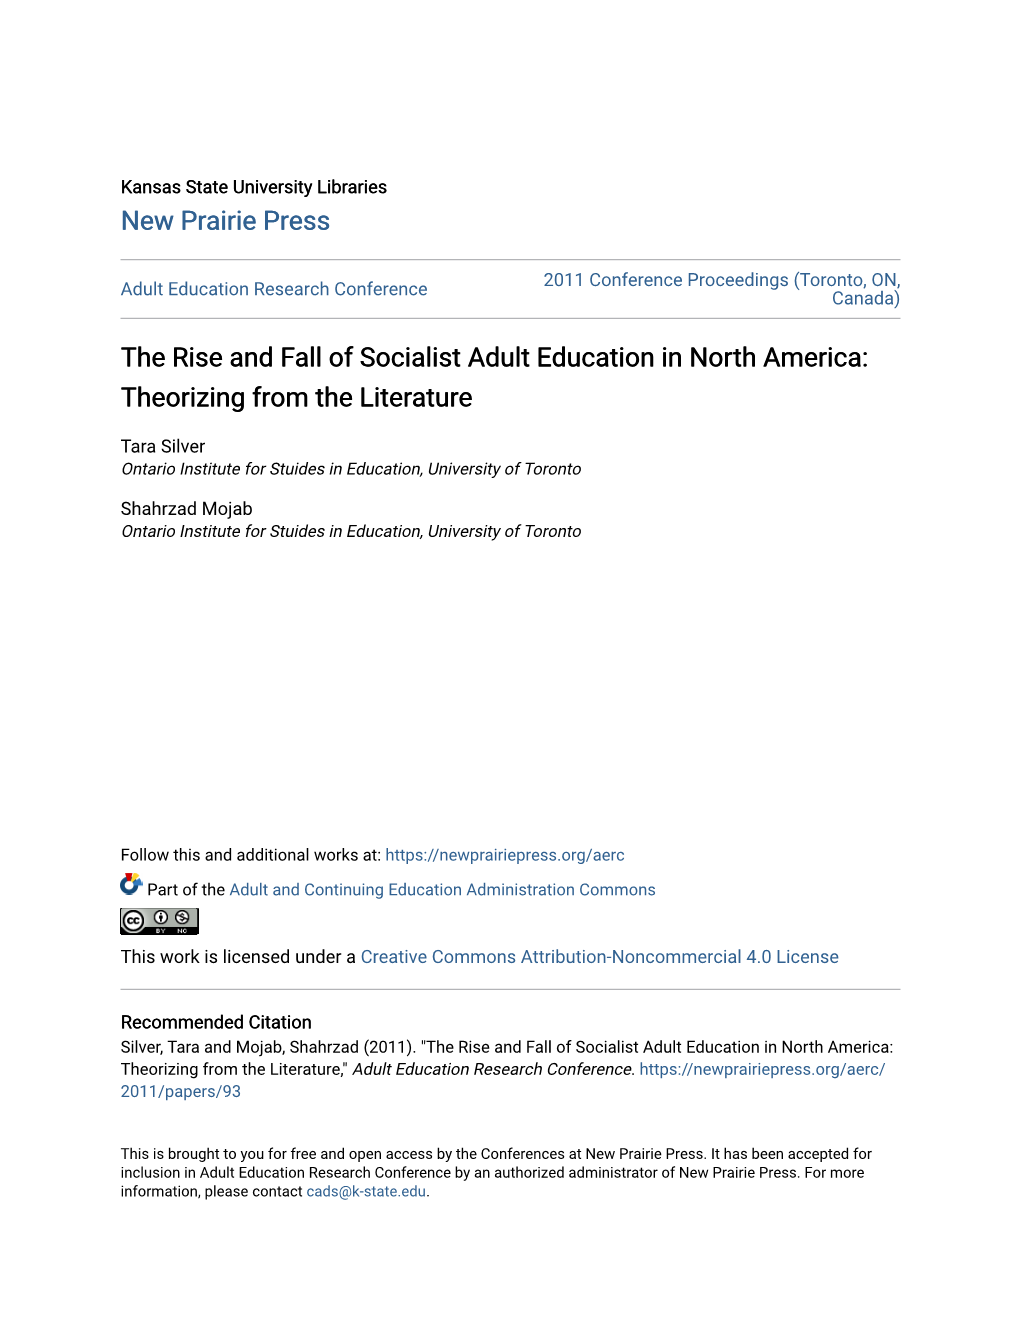 The Rise and Fall of Socialist Adult Education in North America: Theorizing from the Literature